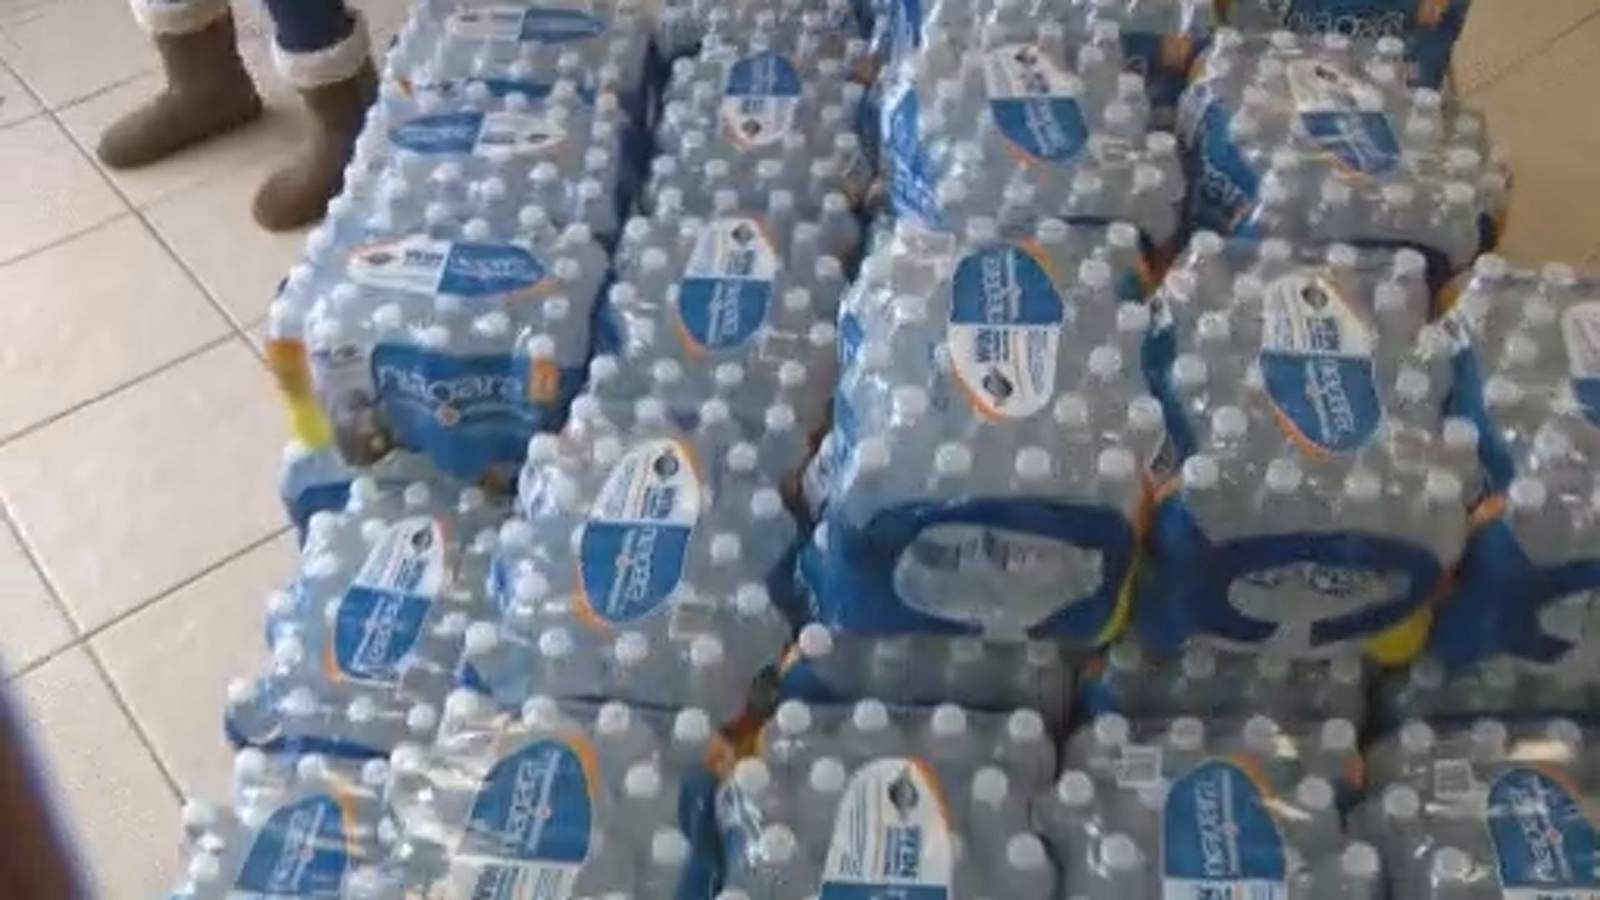 Houston distributes thousands of cases of water after pipes freeze in week’s severe winter storm